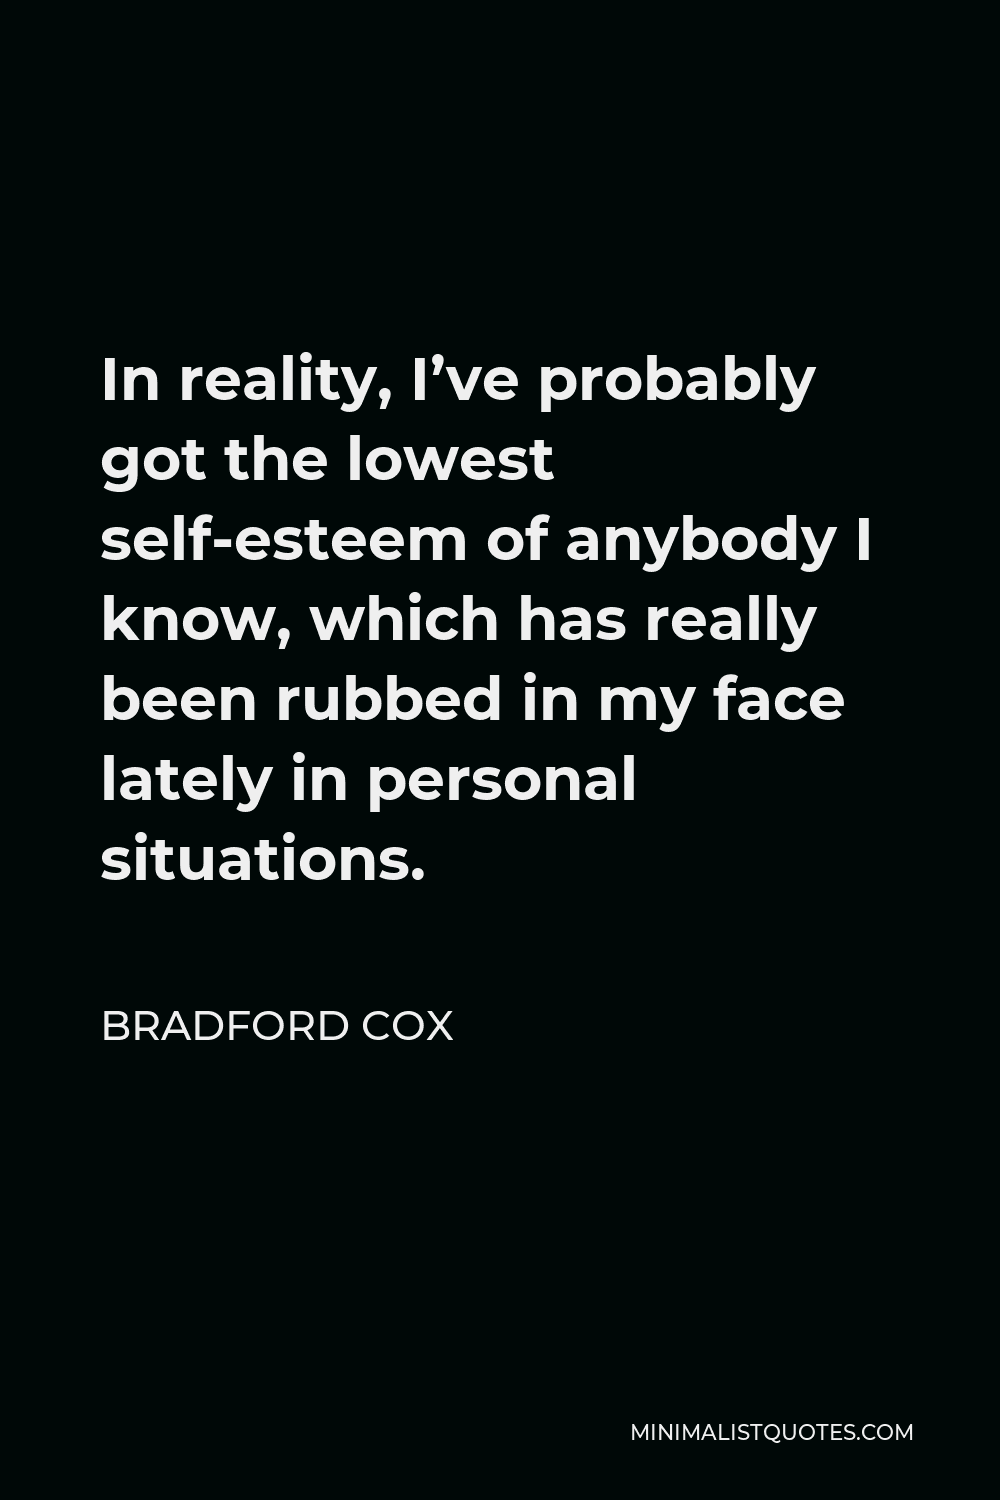 Bradford Cox Quote - In reality, I’ve probably got the lowest self-esteem of anybody I know, which has really been rubbed in my face lately in personal situations.